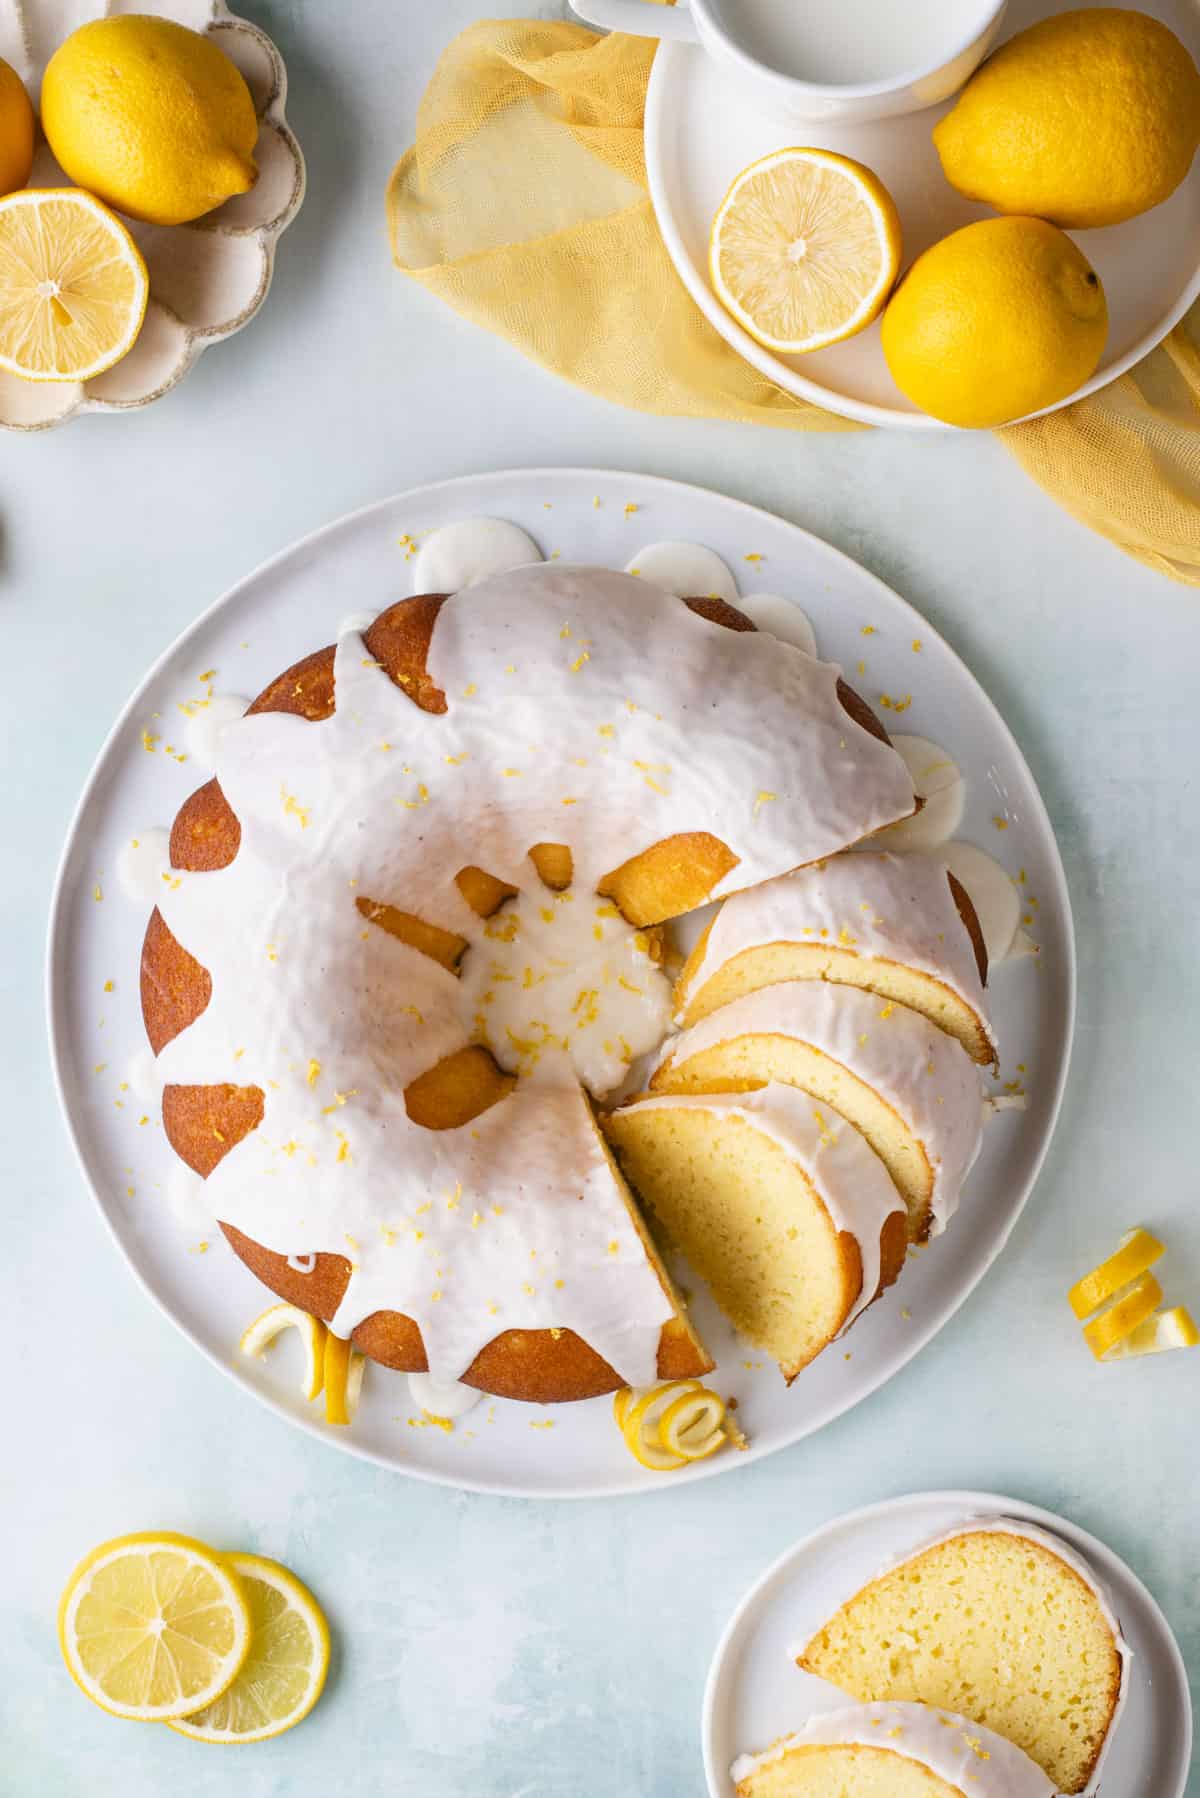 Over head view of a lemon bundt cake on a round, white plate with three pieces sliced and the rest of the cake whole, surrounded by other small white plates, one with two slices of lemon bundt cake, and two with fresh lemons